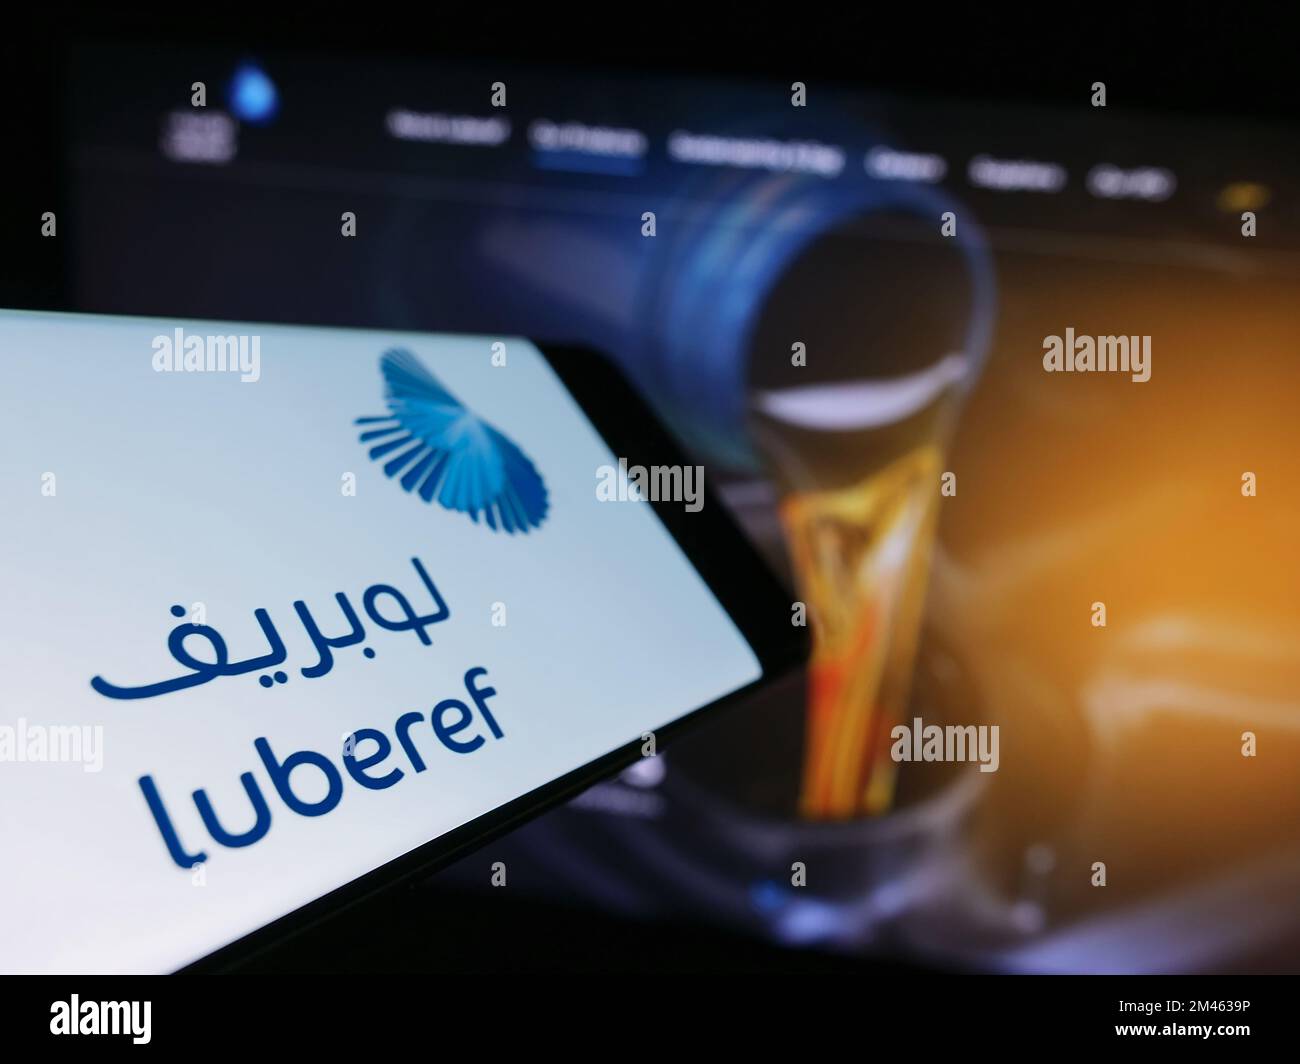 Smartphone with logo of Saudi Arabian base oil company Luberef on screen in front of business website. Focus on center-left of phone display. Stock Photo